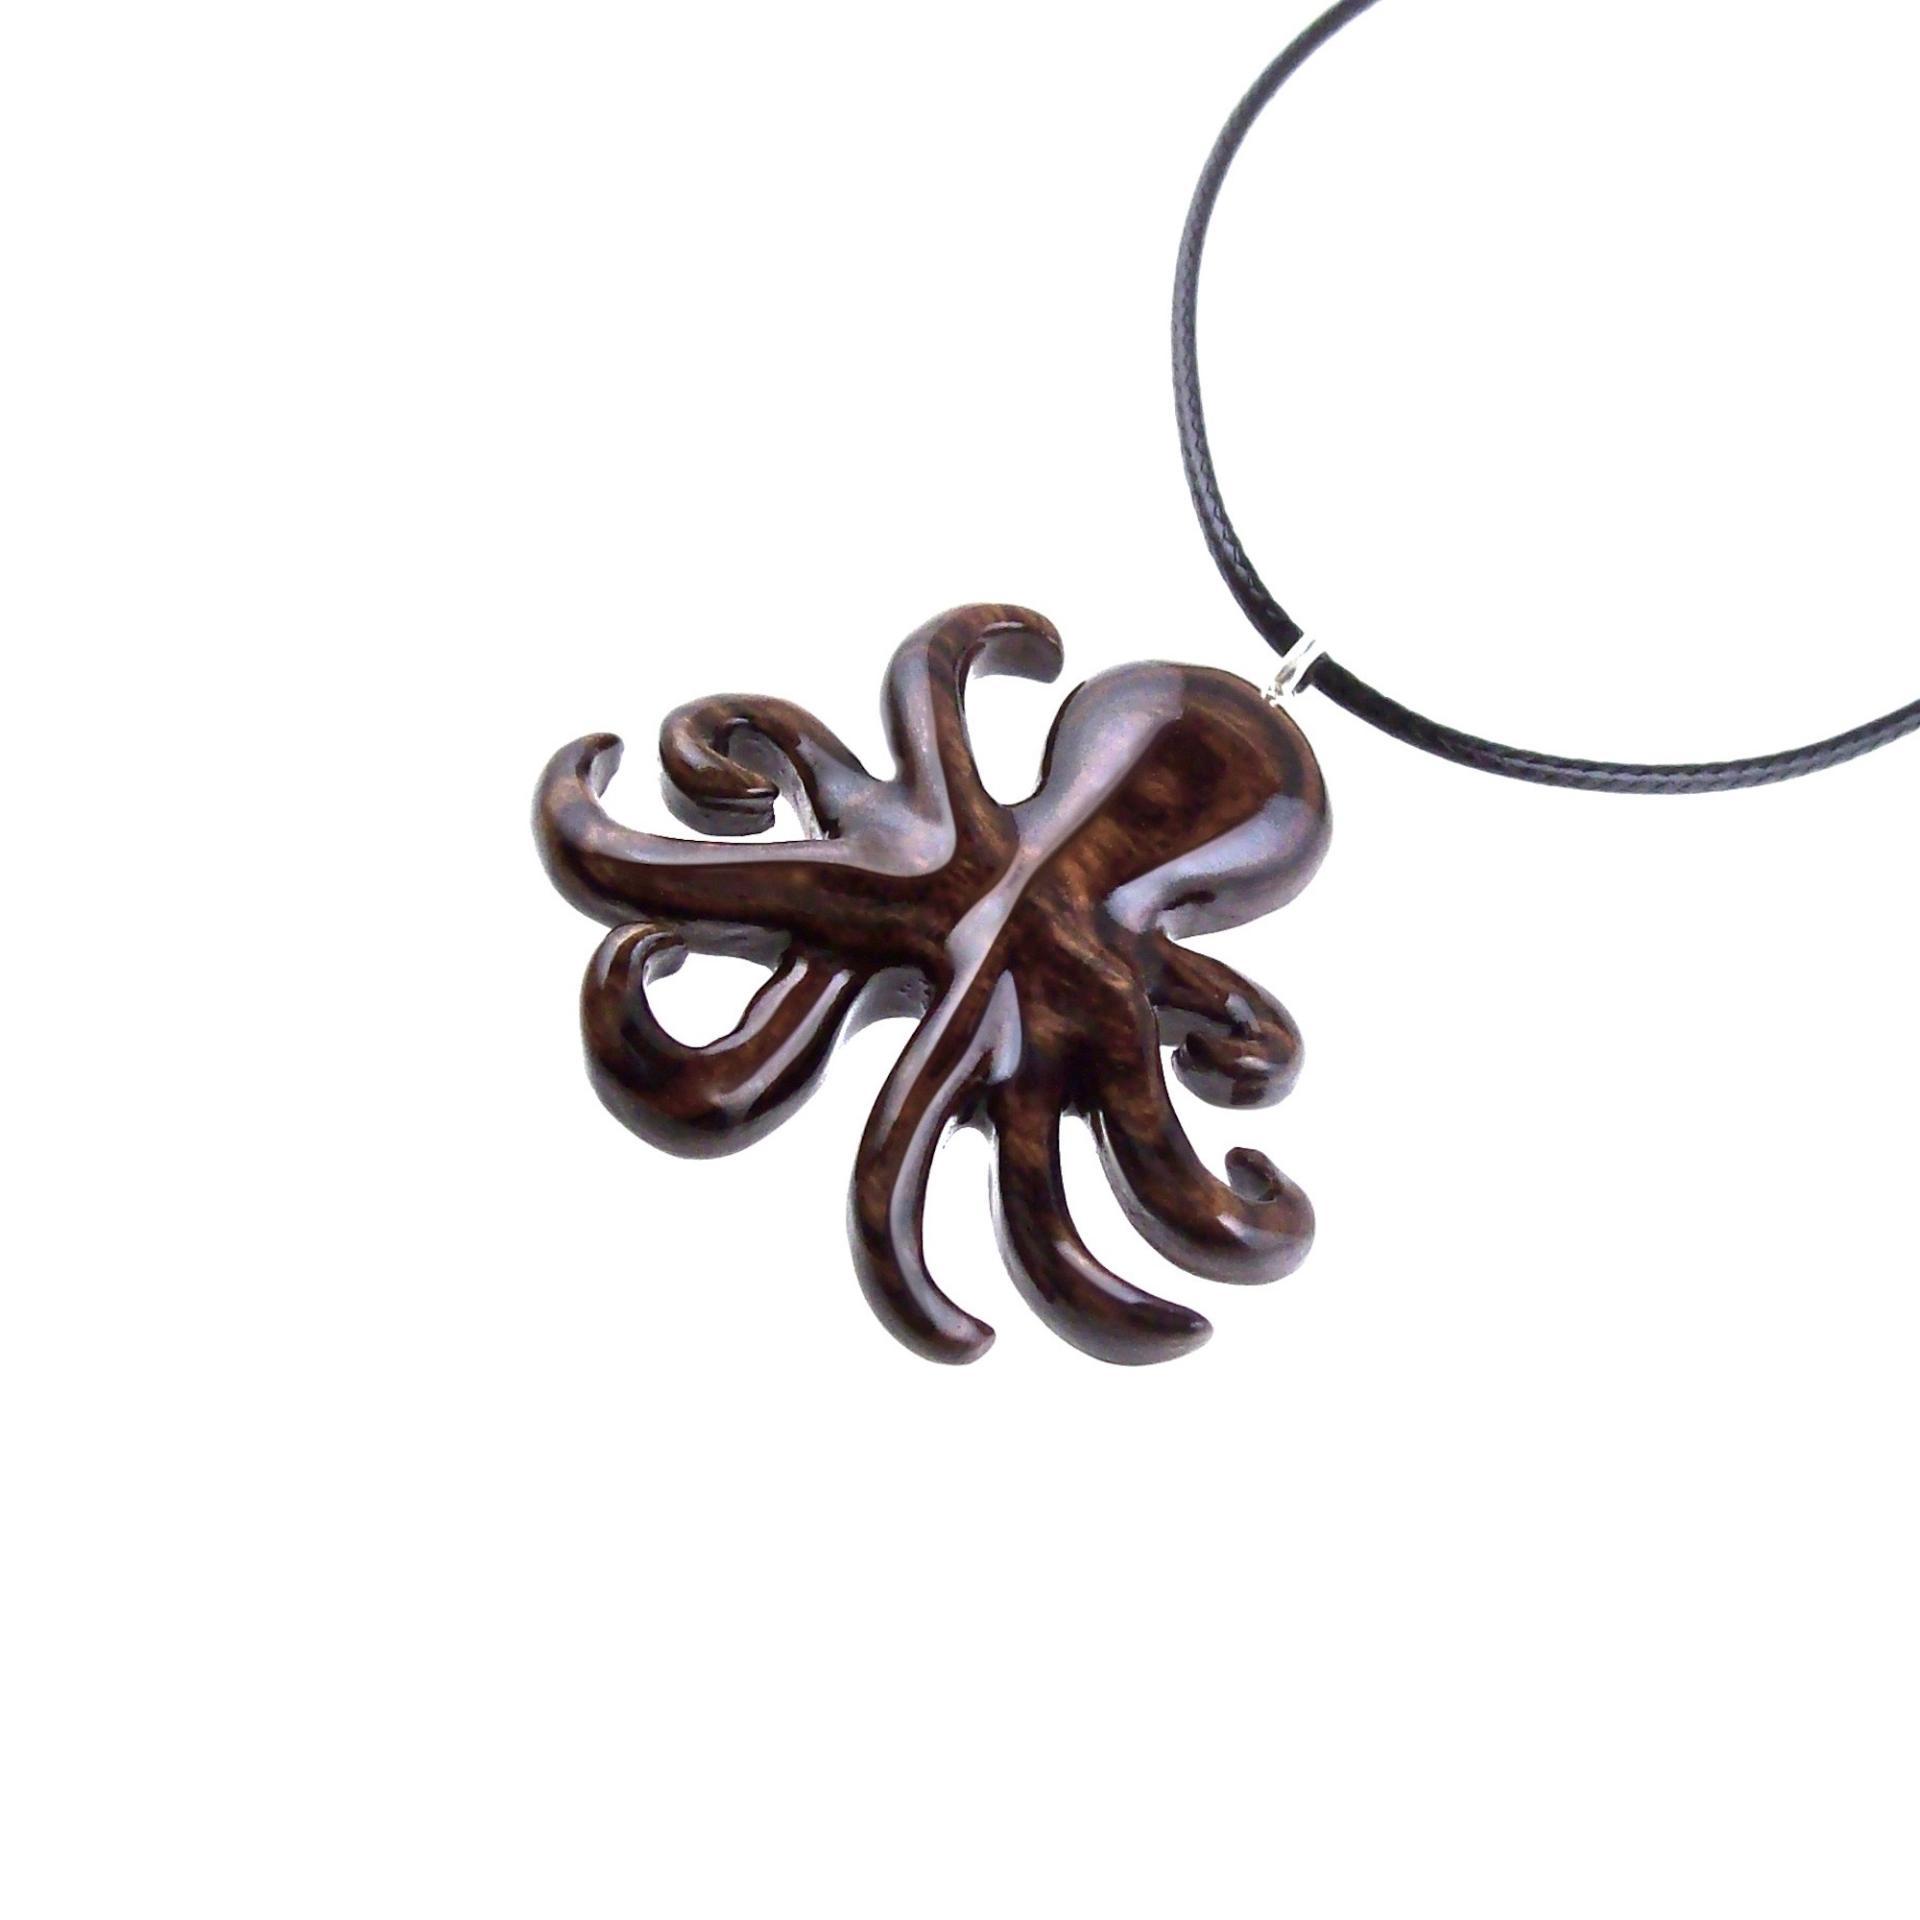 Hand Carved Octopus Necklace for Men or Women, Wooden Squid Pendant, Kraken Necklace, Nautical Wood Jewelry Gift for Him Her